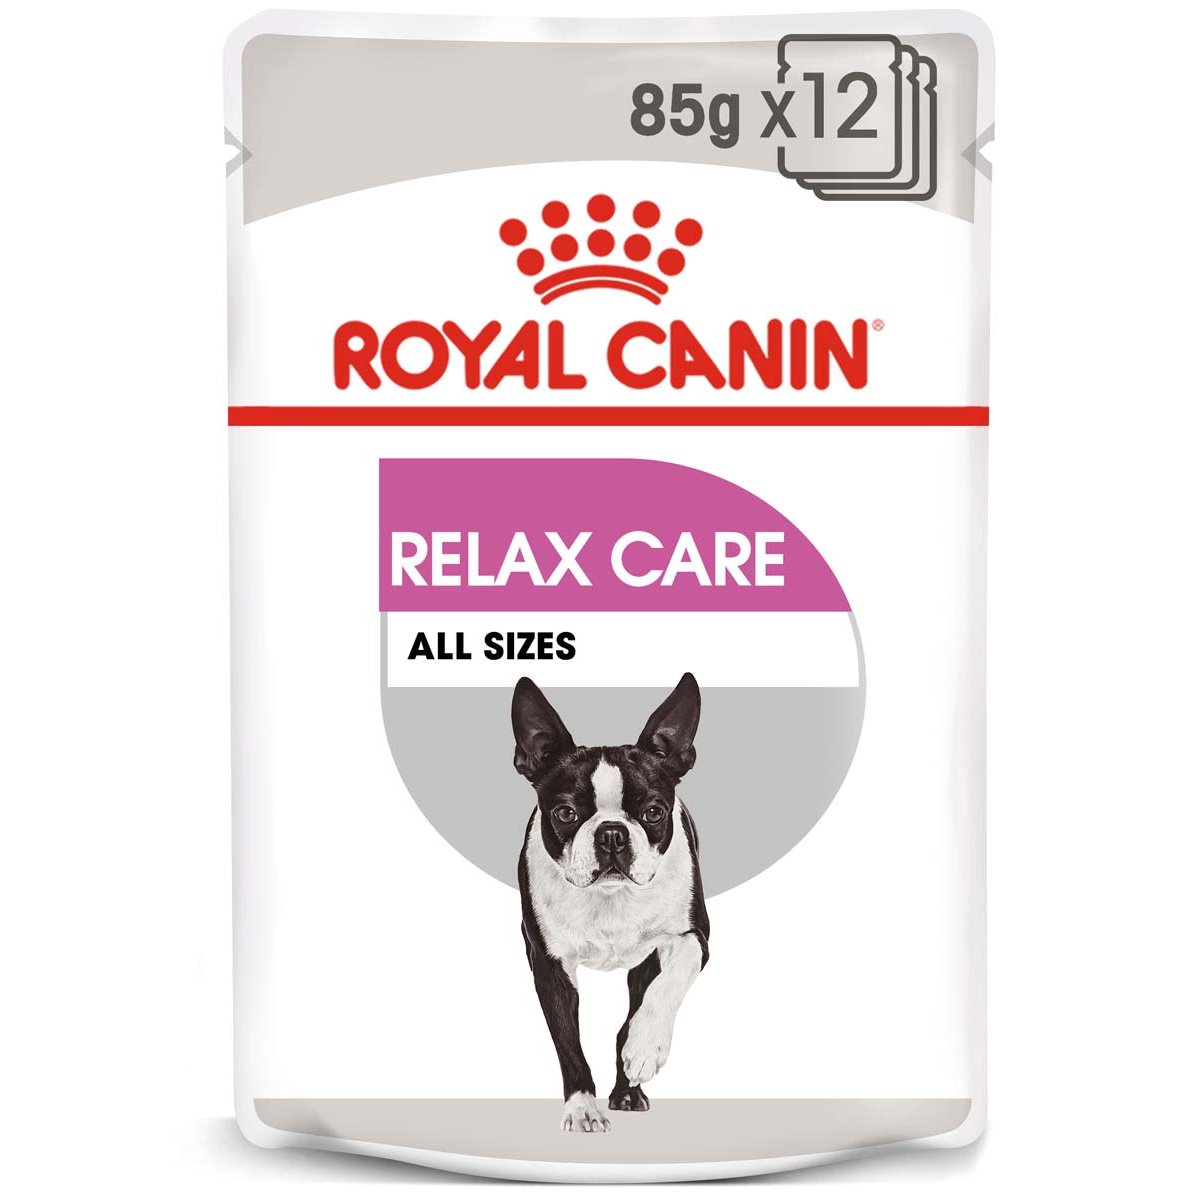 ROYAL CANIN RELAX CARE Nassfutter für Hunde in unruhigem Umfeld 12x85g von Royal Canin